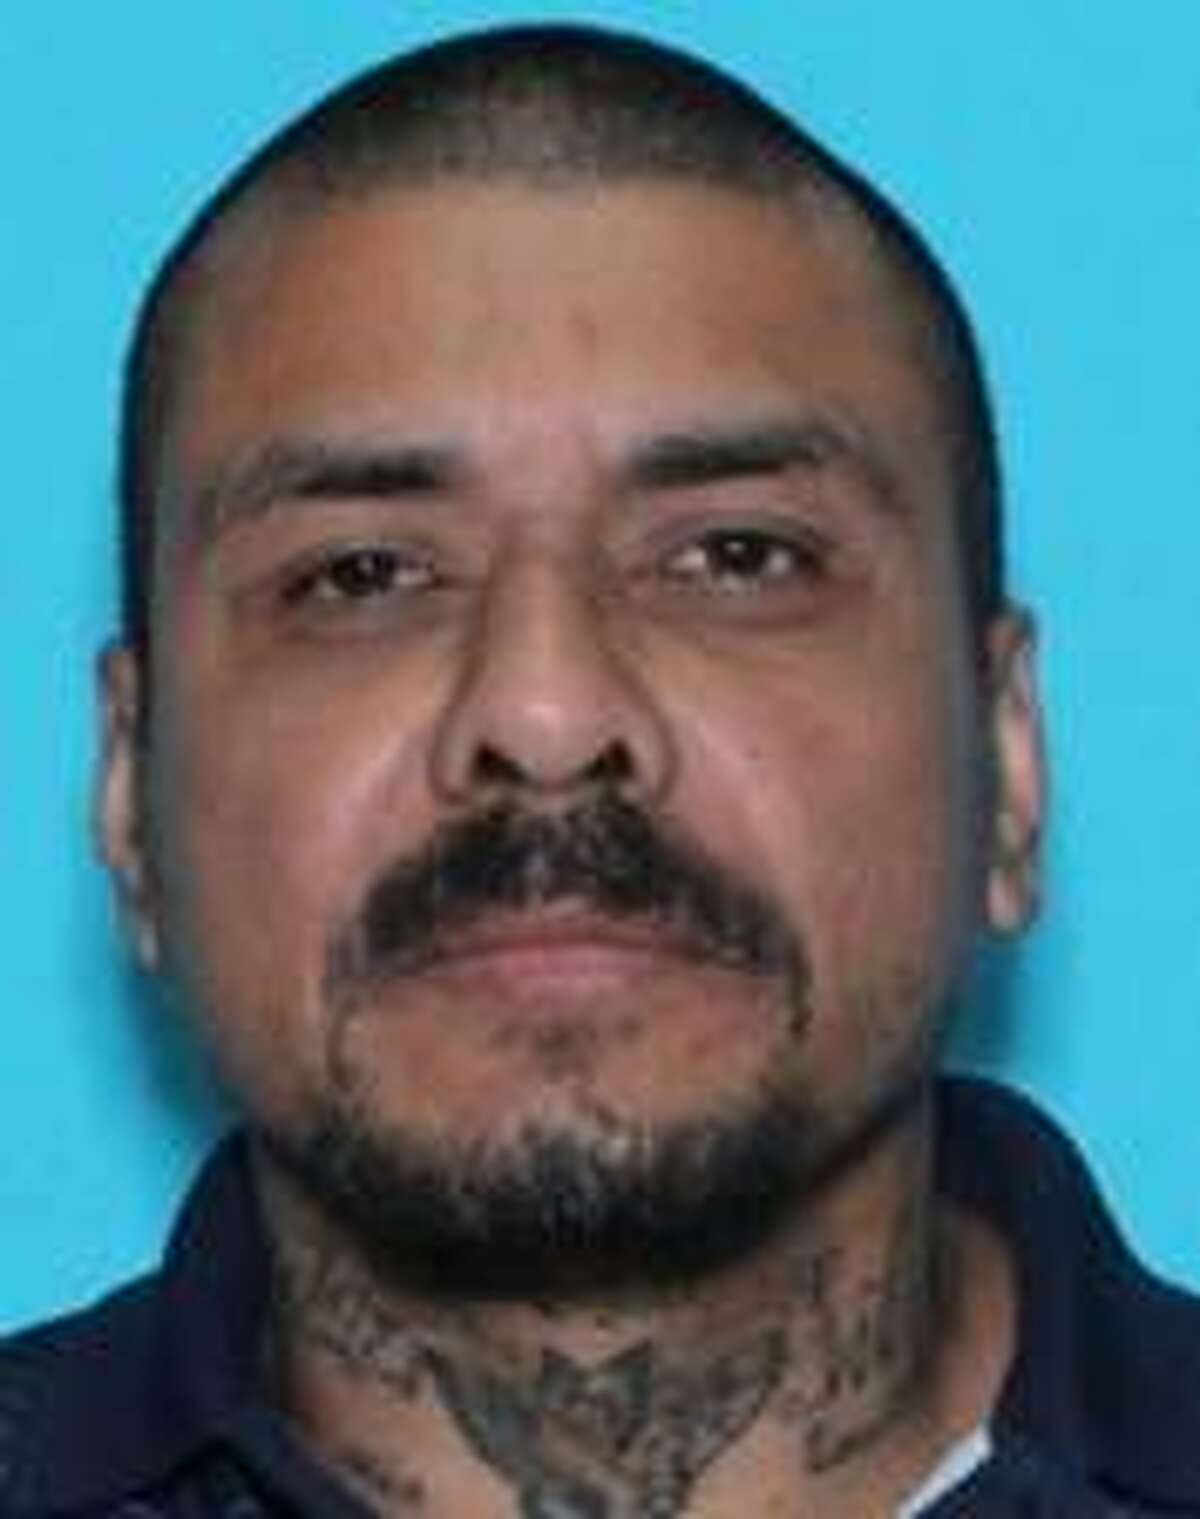 Dps Sex Offender With San Antonio Ties Added To Texas 10 Most Wanted List